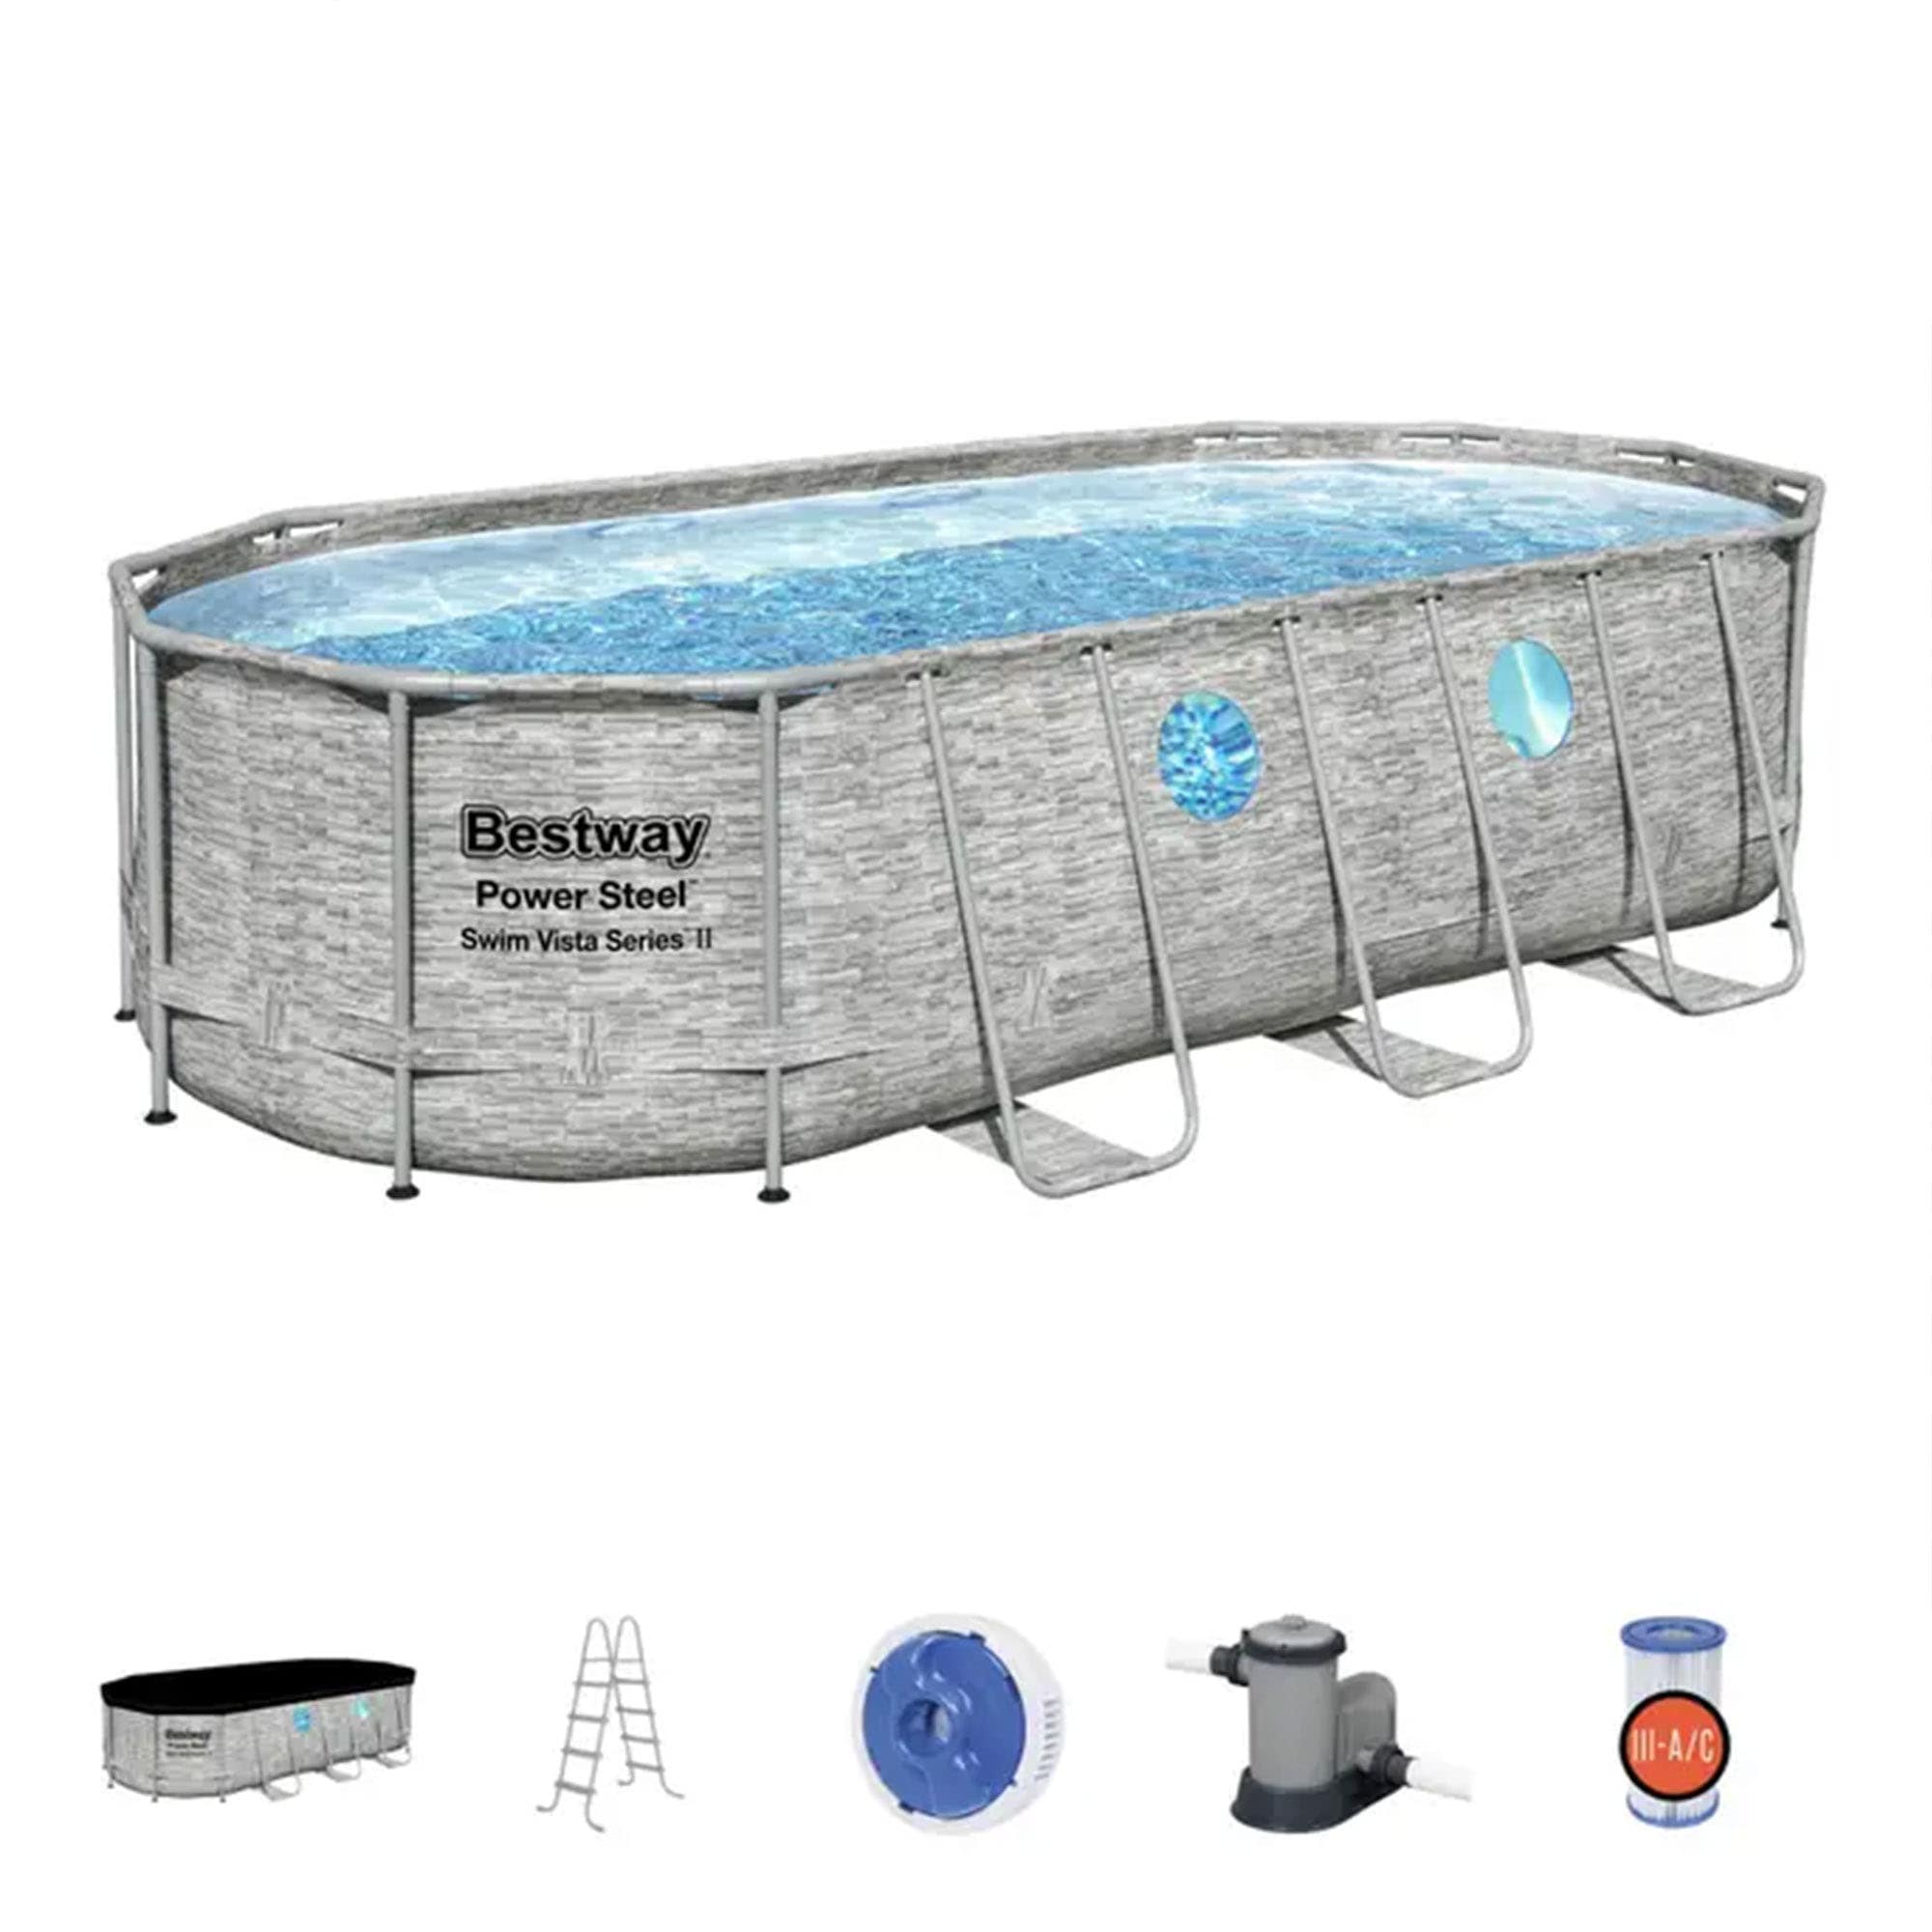 Bestway Power Steel Swim Vista 18-ft x 9-ft x 48-in Metal Frame Oval Above-Ground Pool with Filter Pump,Ground Cloth,Pool Cover and Ladder Polyester -  147489